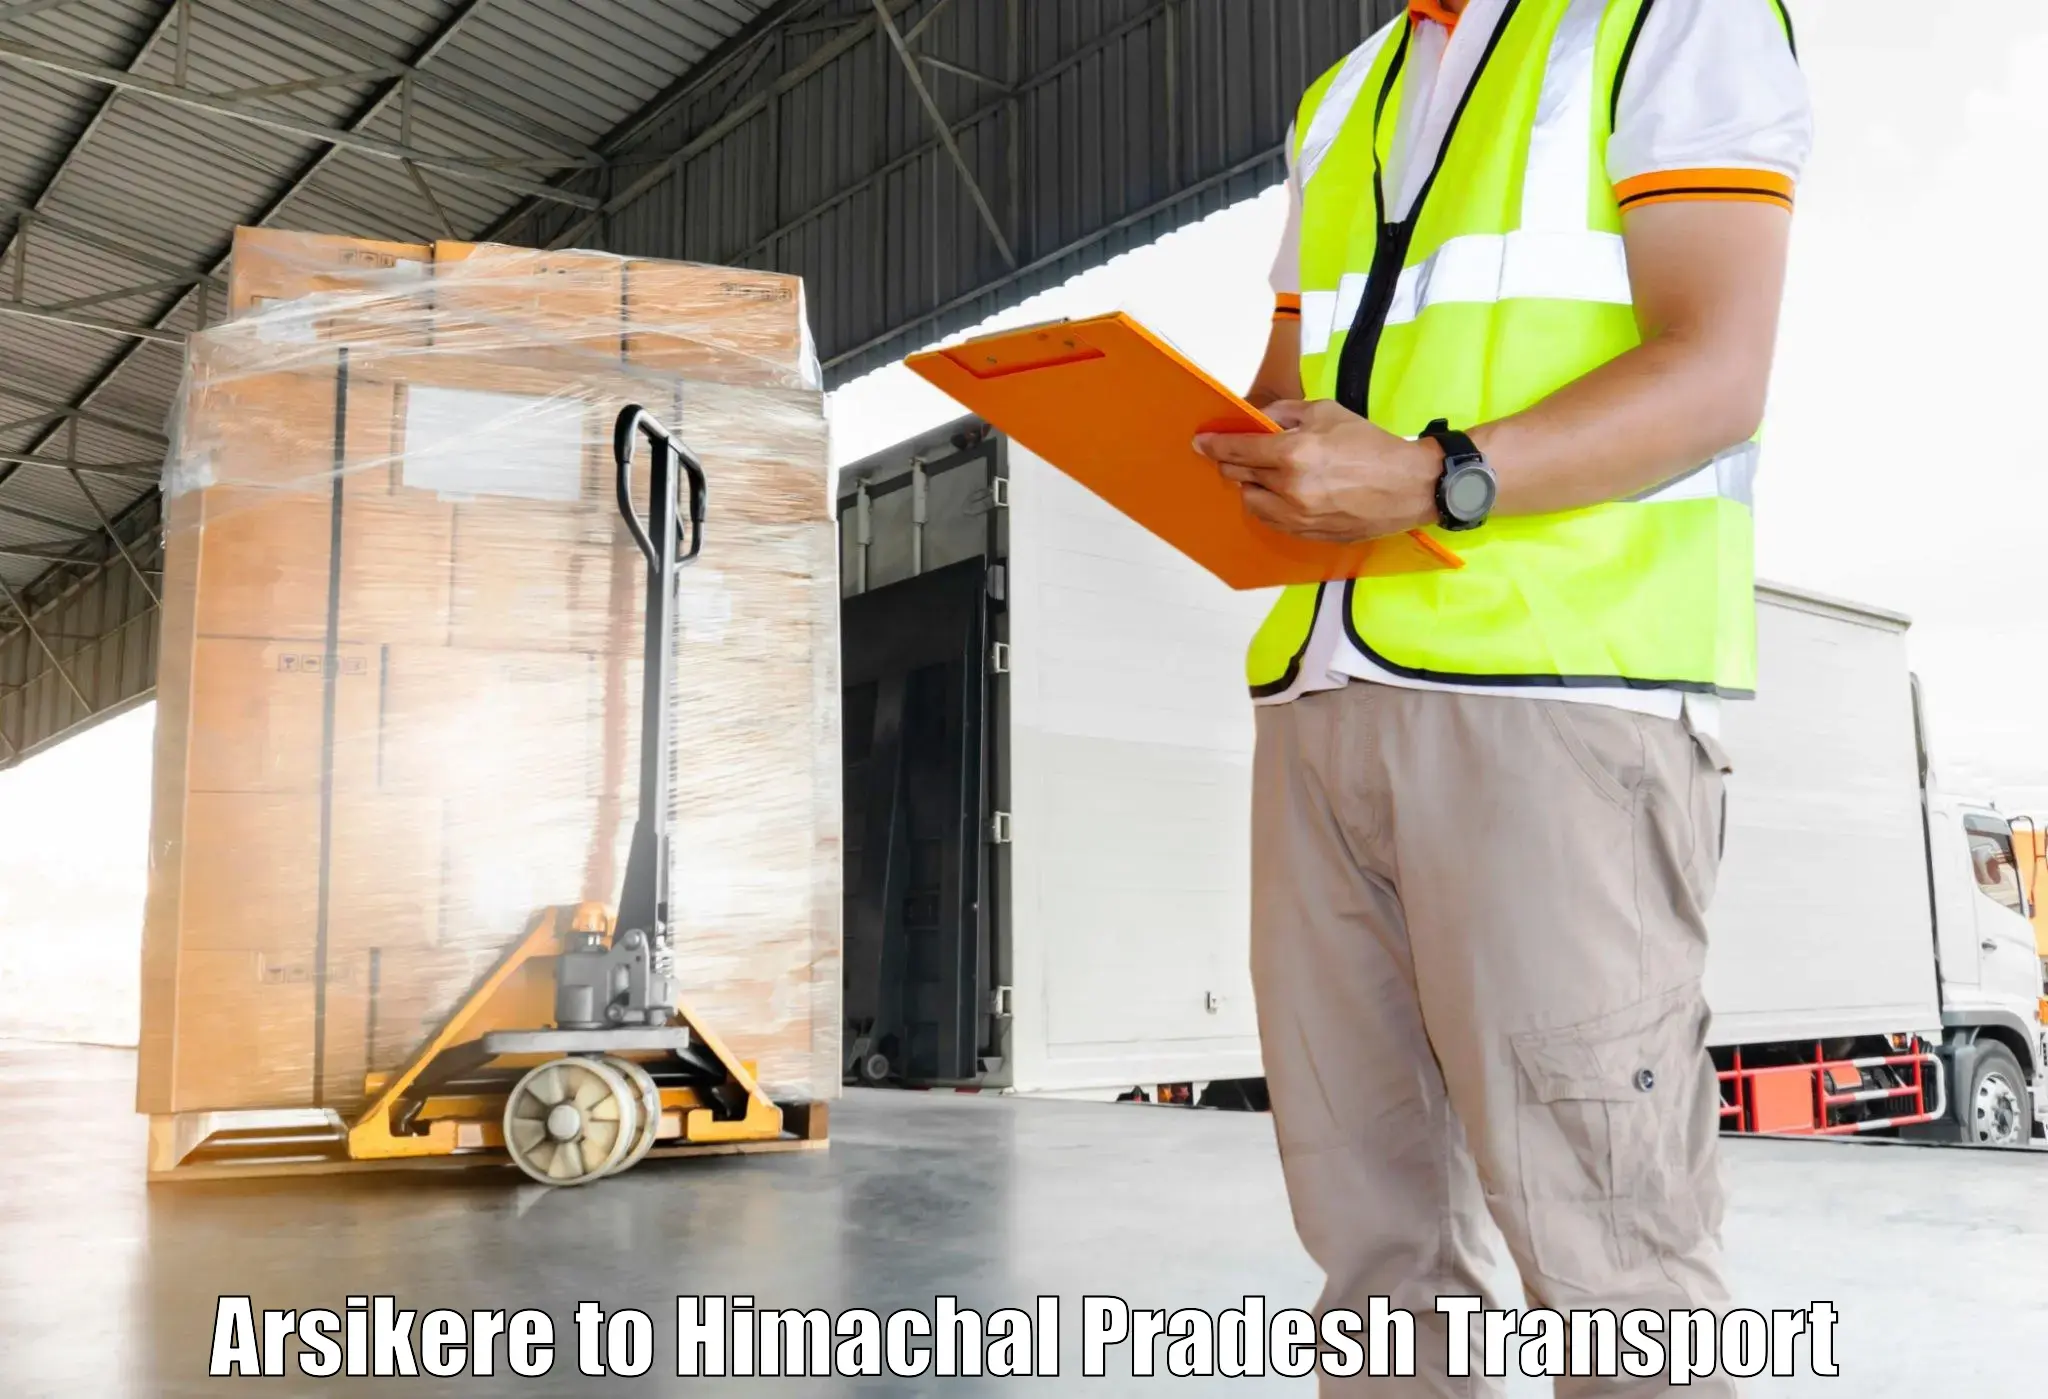 Vehicle transport services Arsikere to Himachal Pradesh